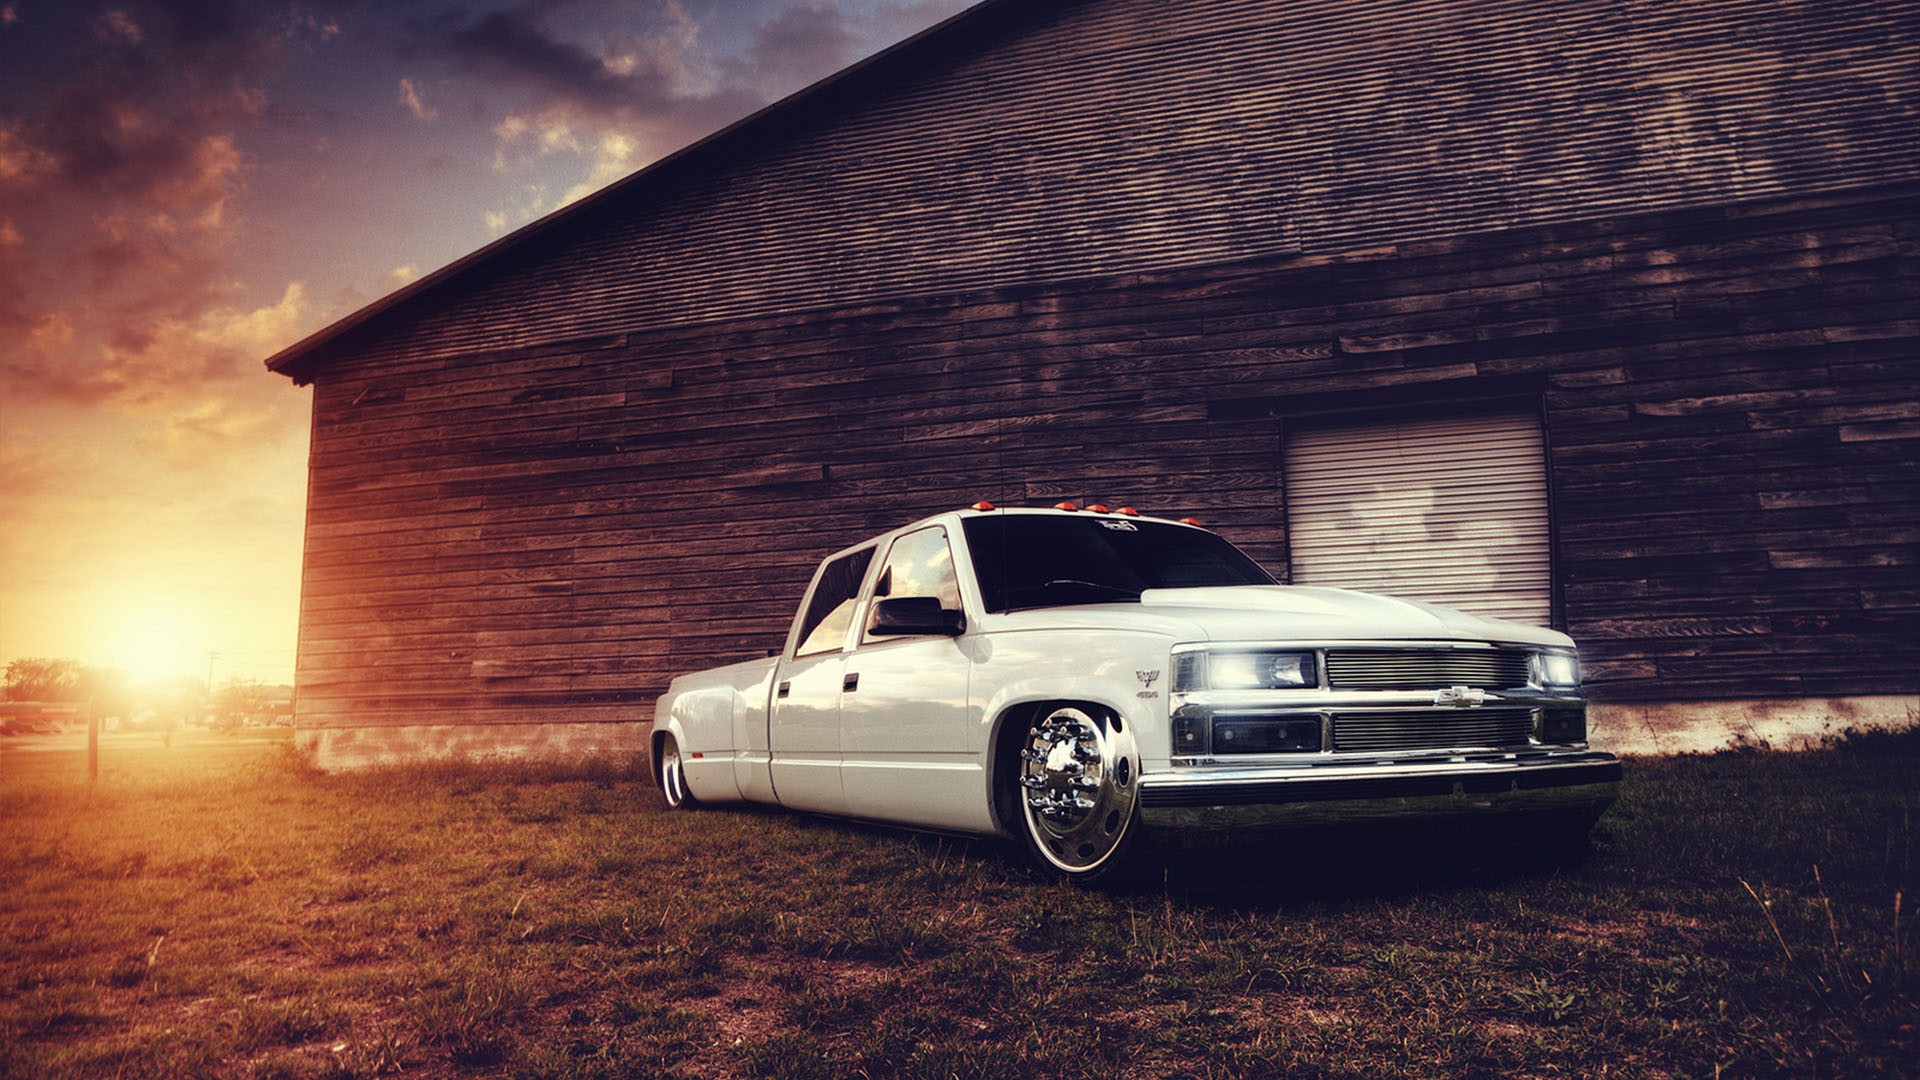 3 Chevy Truck HD Wallpapers | Backgrounds - Wallpaper Abyss